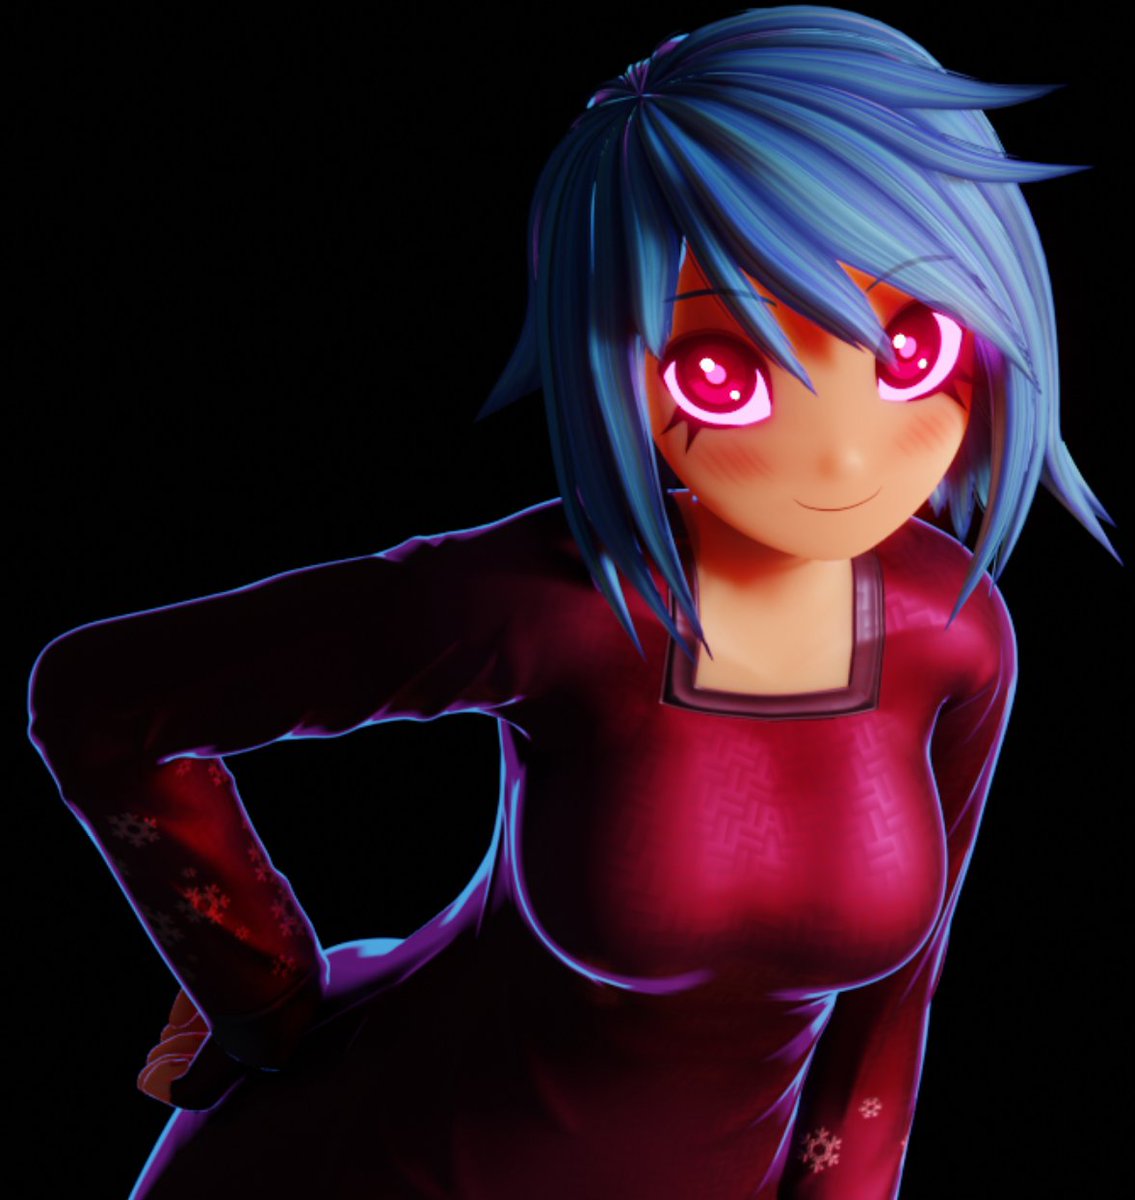 So, you want my opinion on something? (not to be confused with 3DCG advice) What would you like to ask me? #blender #animegirl